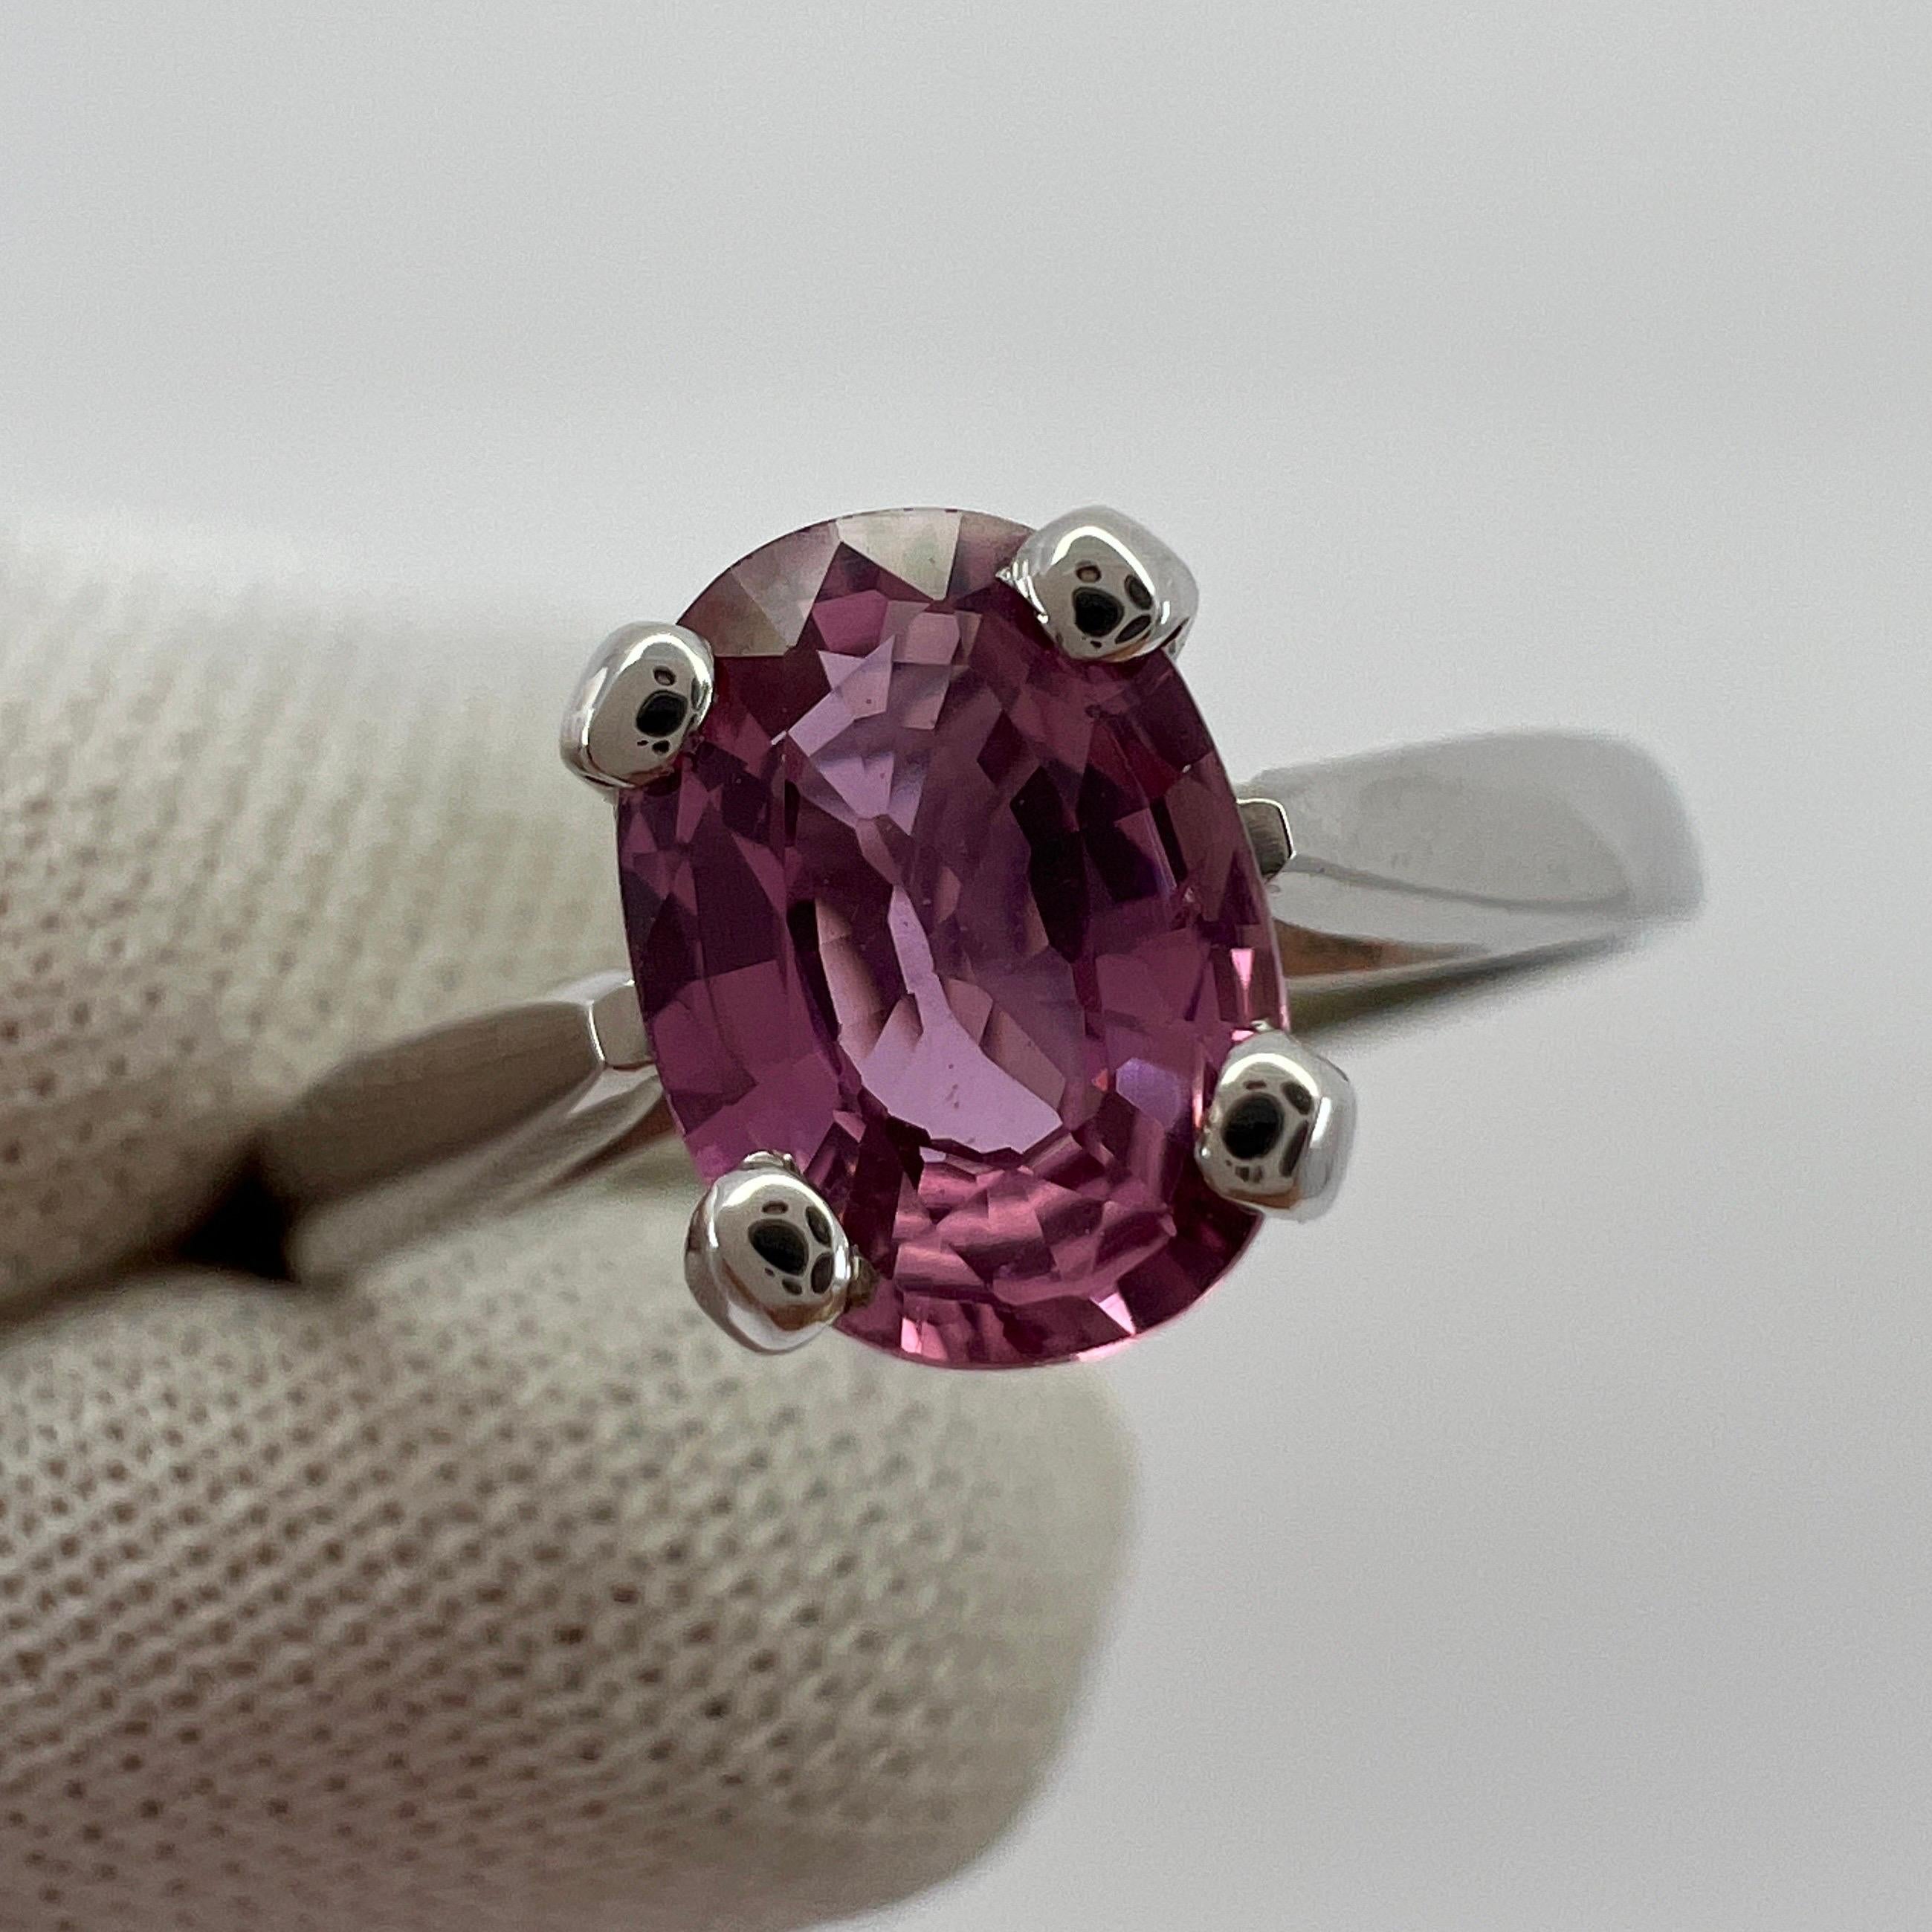 Fine Natural Vivid Pink Sapphire Oval Cut 18k White Gold Solitaire Ring.

Beautiful 1.05 Carat sapphire with a stunning vivid pink colour and excellent clarity. Very clean stone. Also has an excellent oval cut which shows lots of sparkle and light